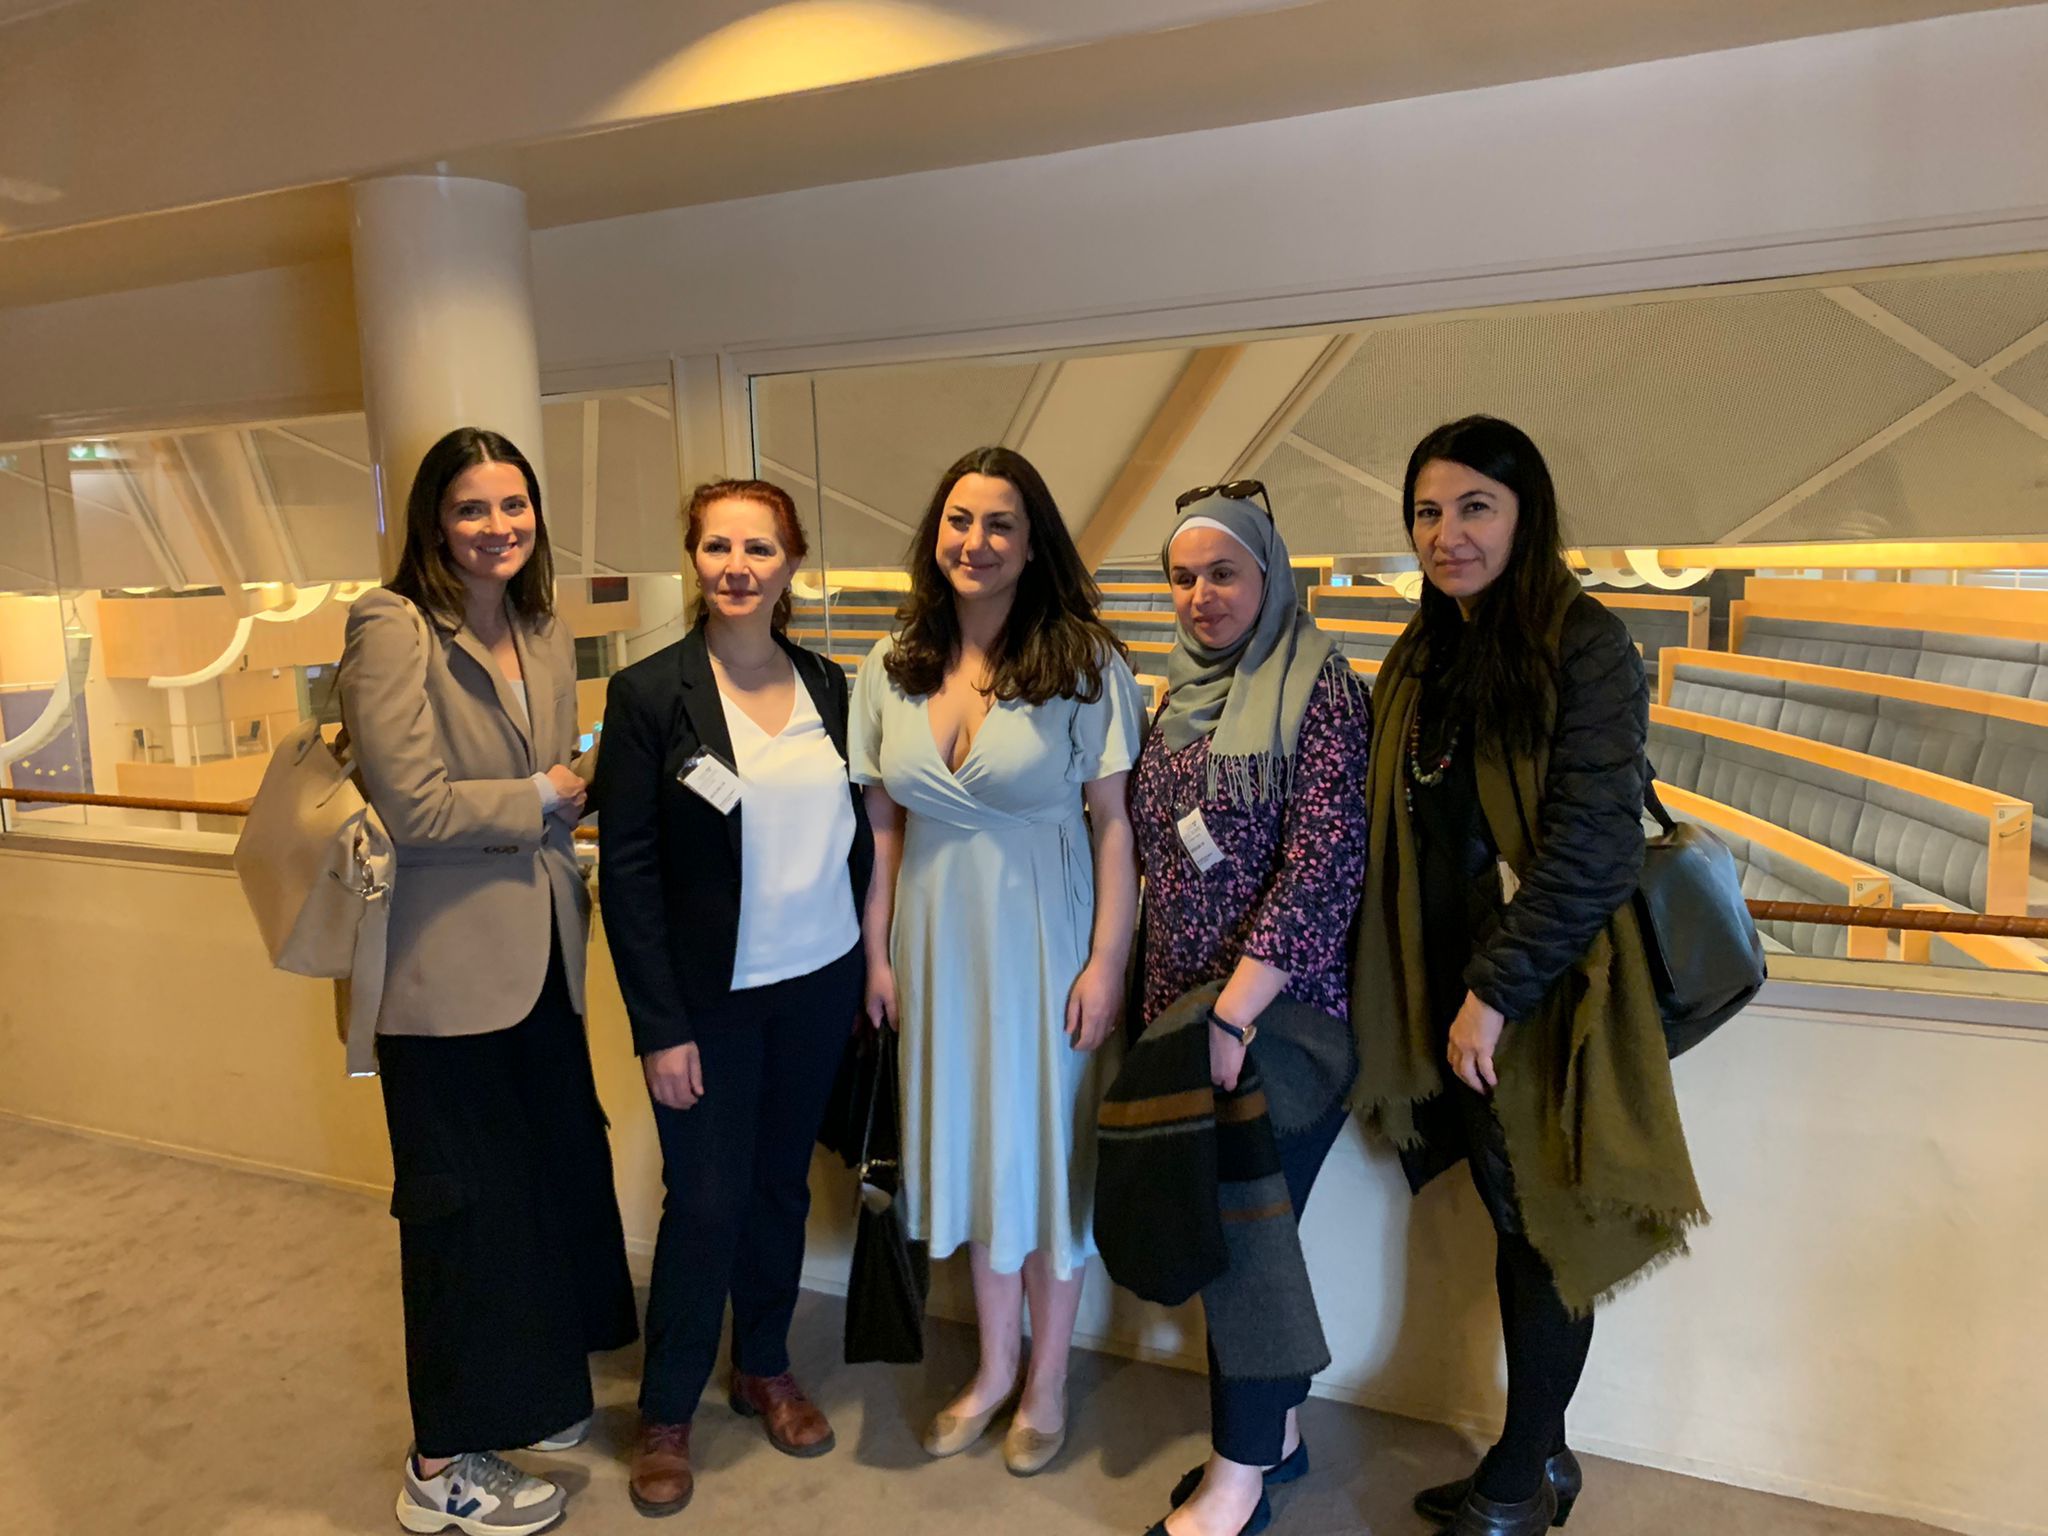 The visit of the Syrian Women’s Political Movement to Sweden as part of the “Women Decide” program